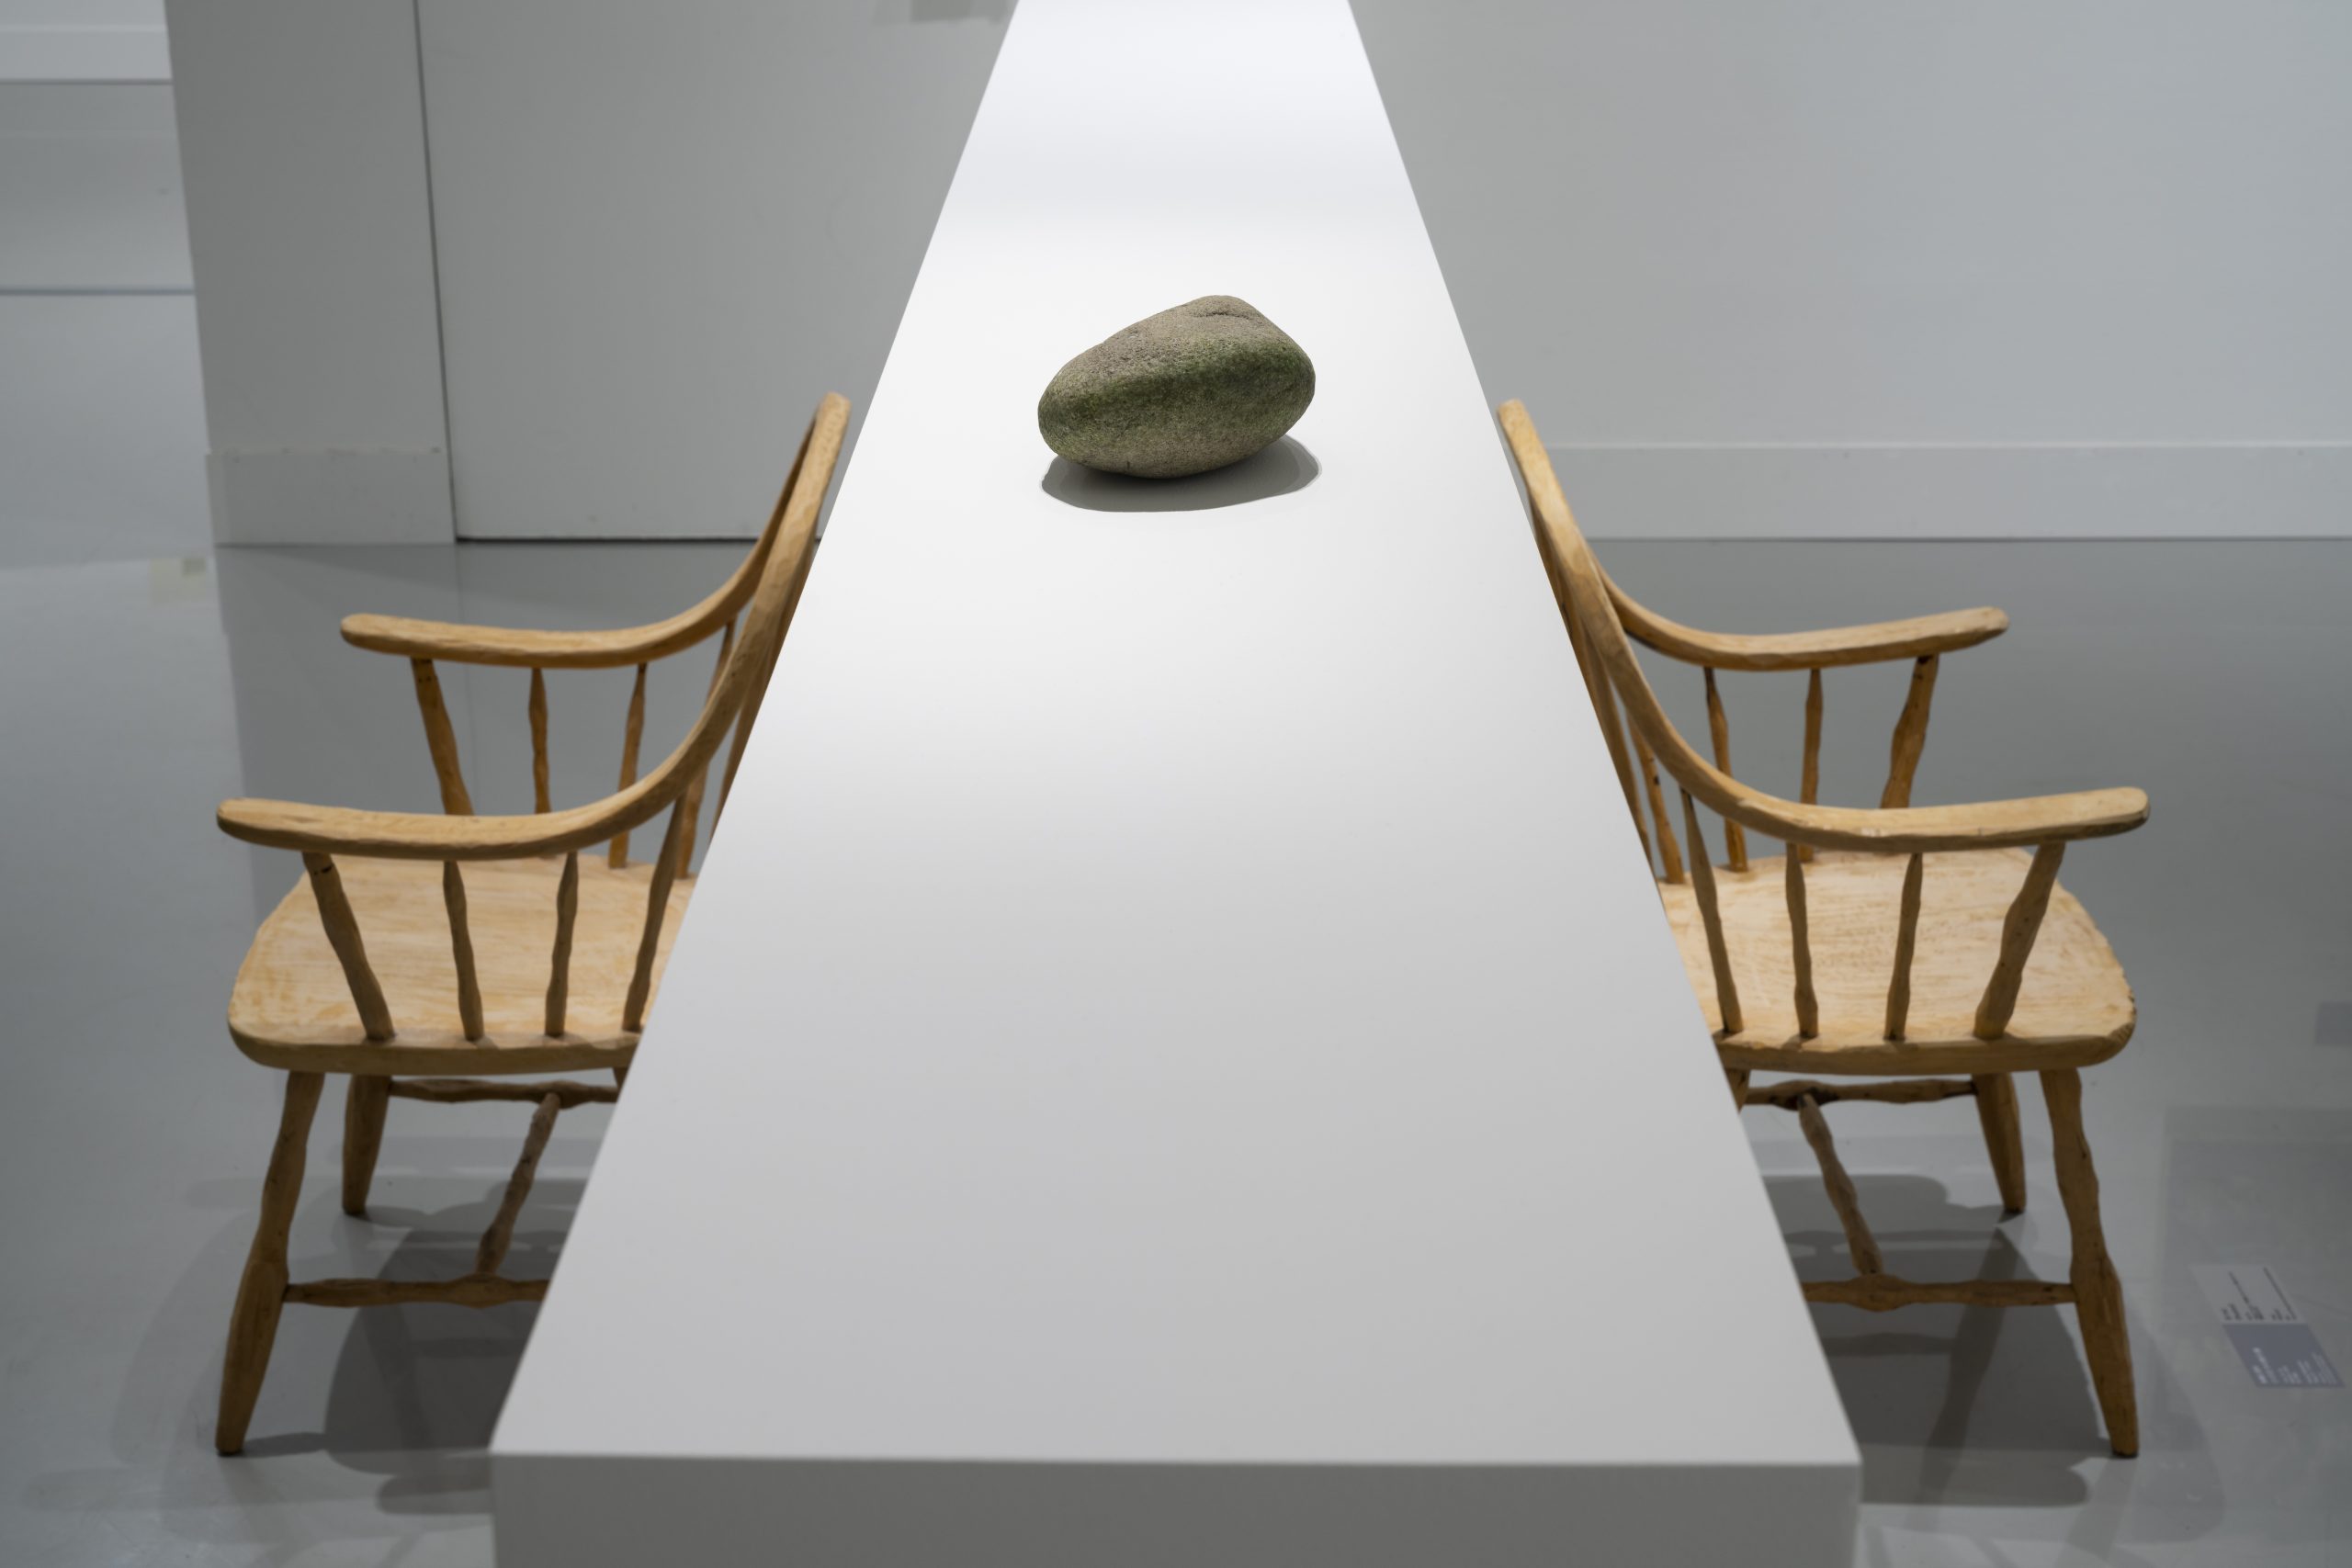 ［mé］《matter α #Ⅶ》 2021 sand, stone, rock particles, etc、  《position》　2021 2 chairs from 《Hagu２》 by Genpei Akasegawa 